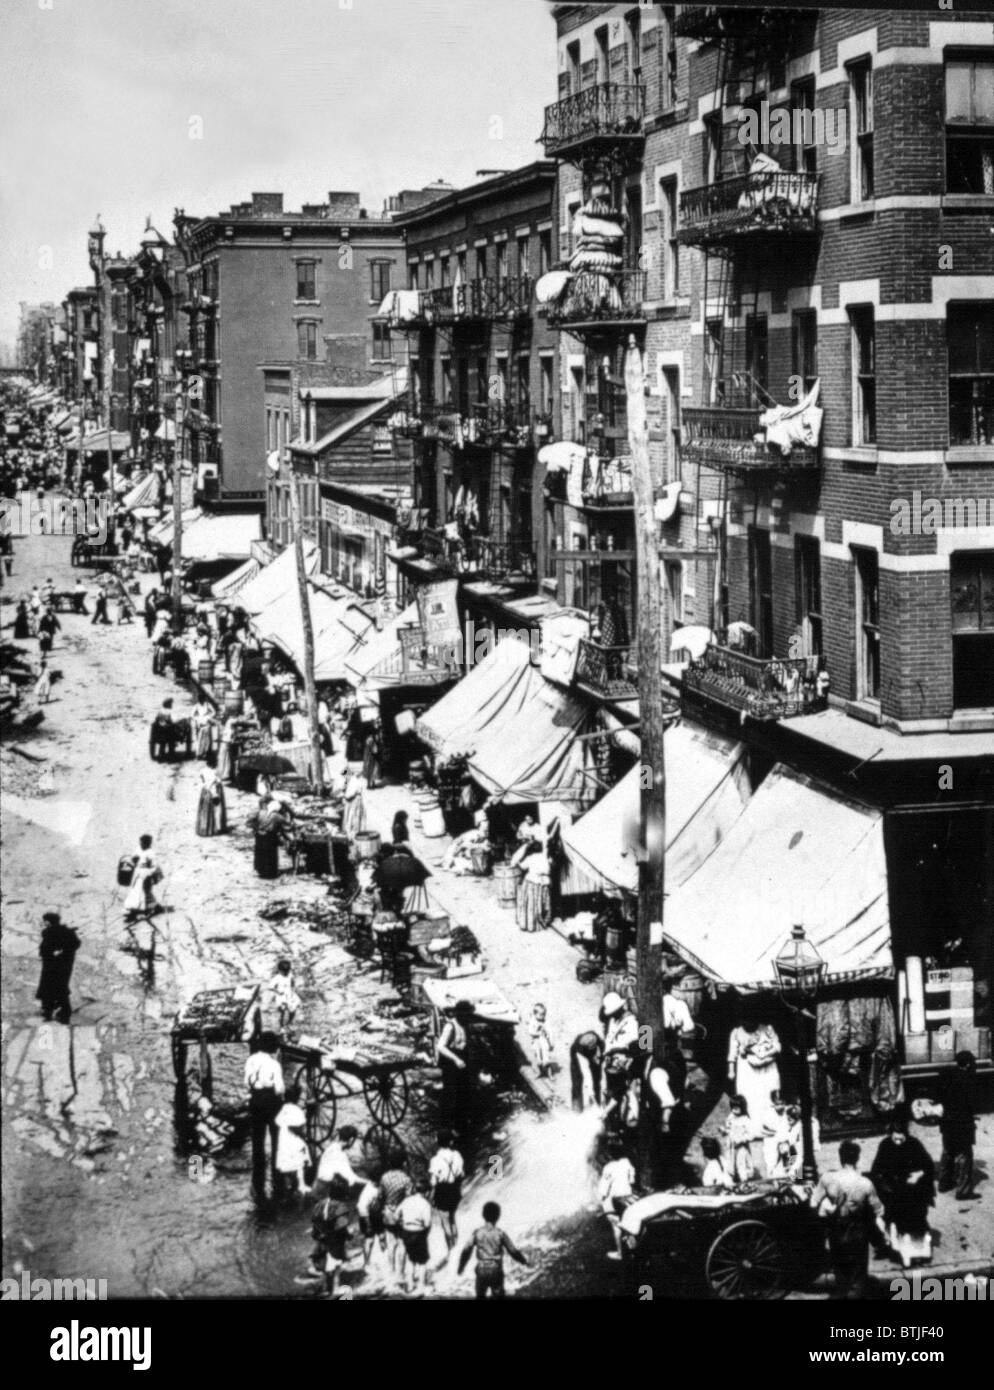 The Lower East Side NYC: A Walking Tour of Manhattan's Immigrant History 